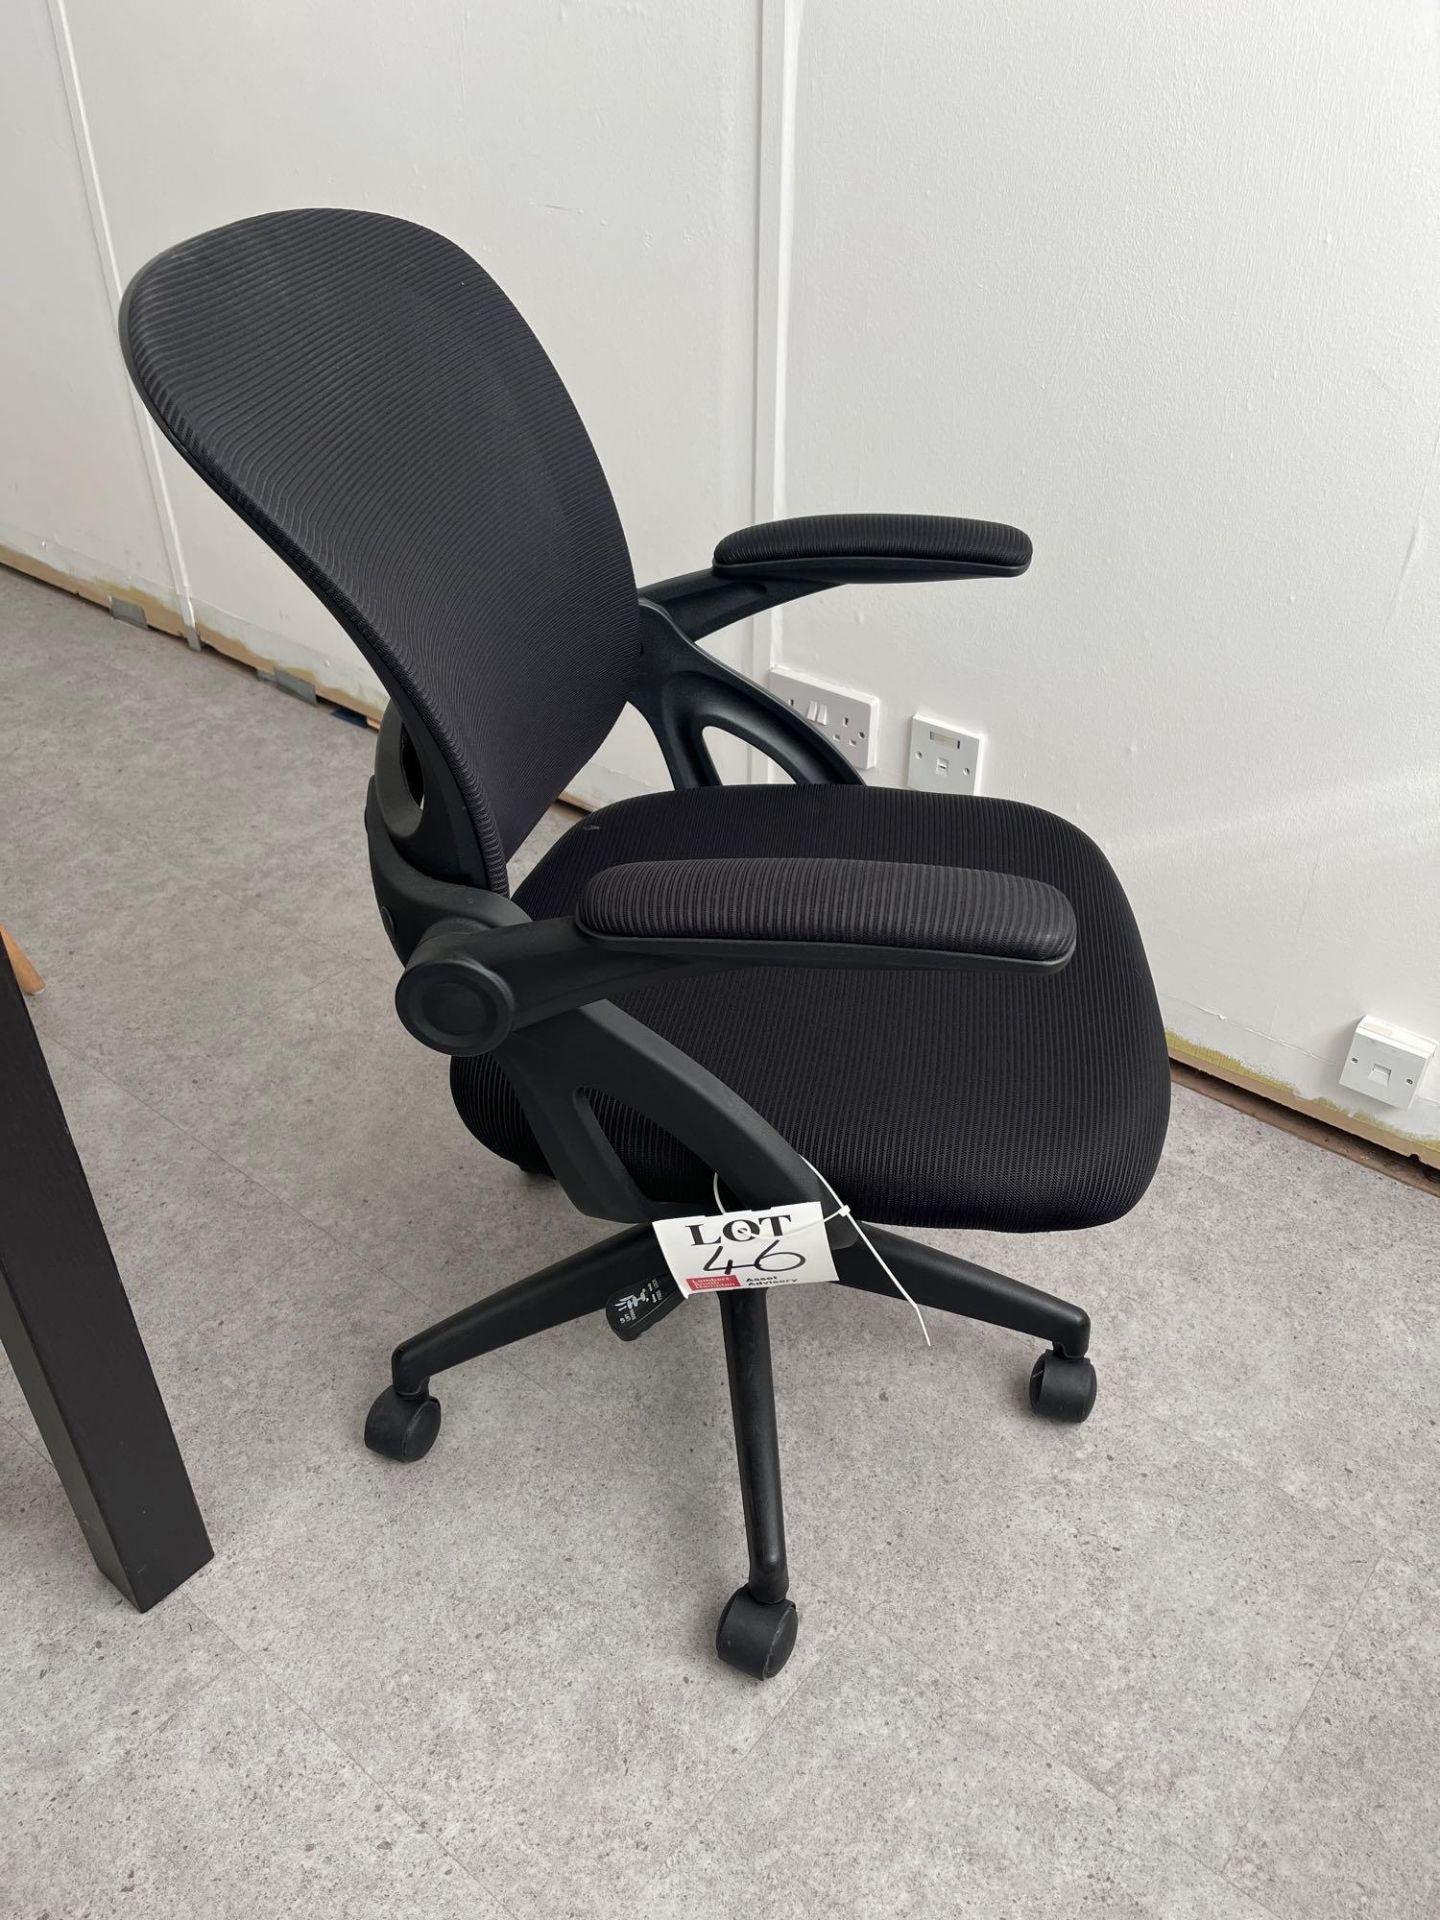 Two black mesh back swivel office chairs